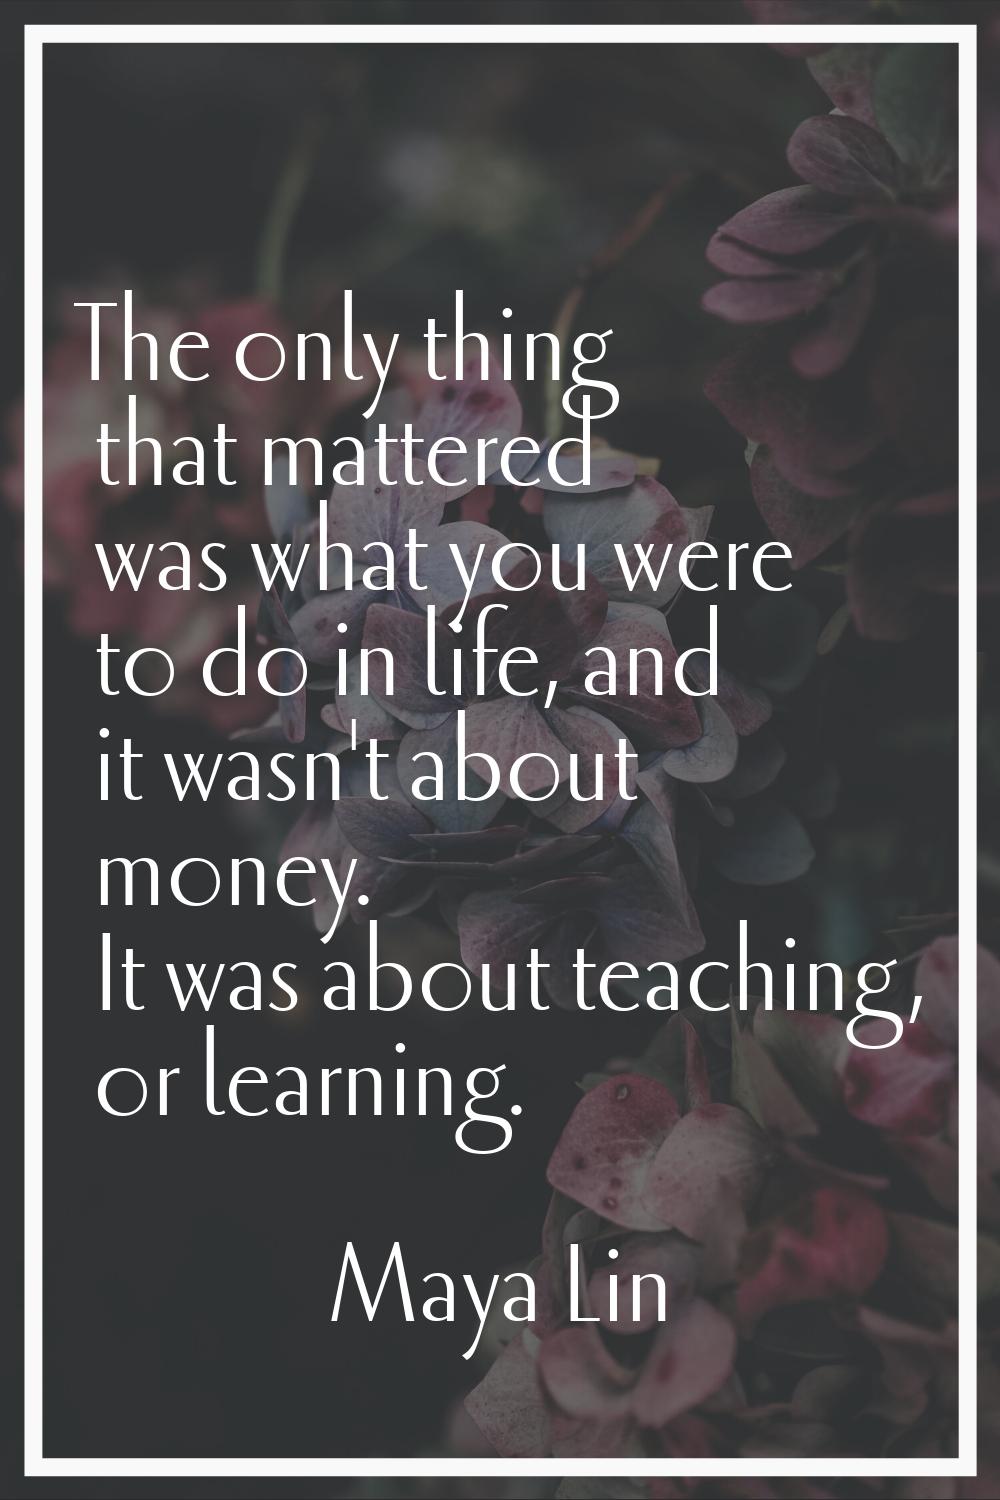 The only thing that mattered was what you were to do in life, and it wasn't about money. It was abo